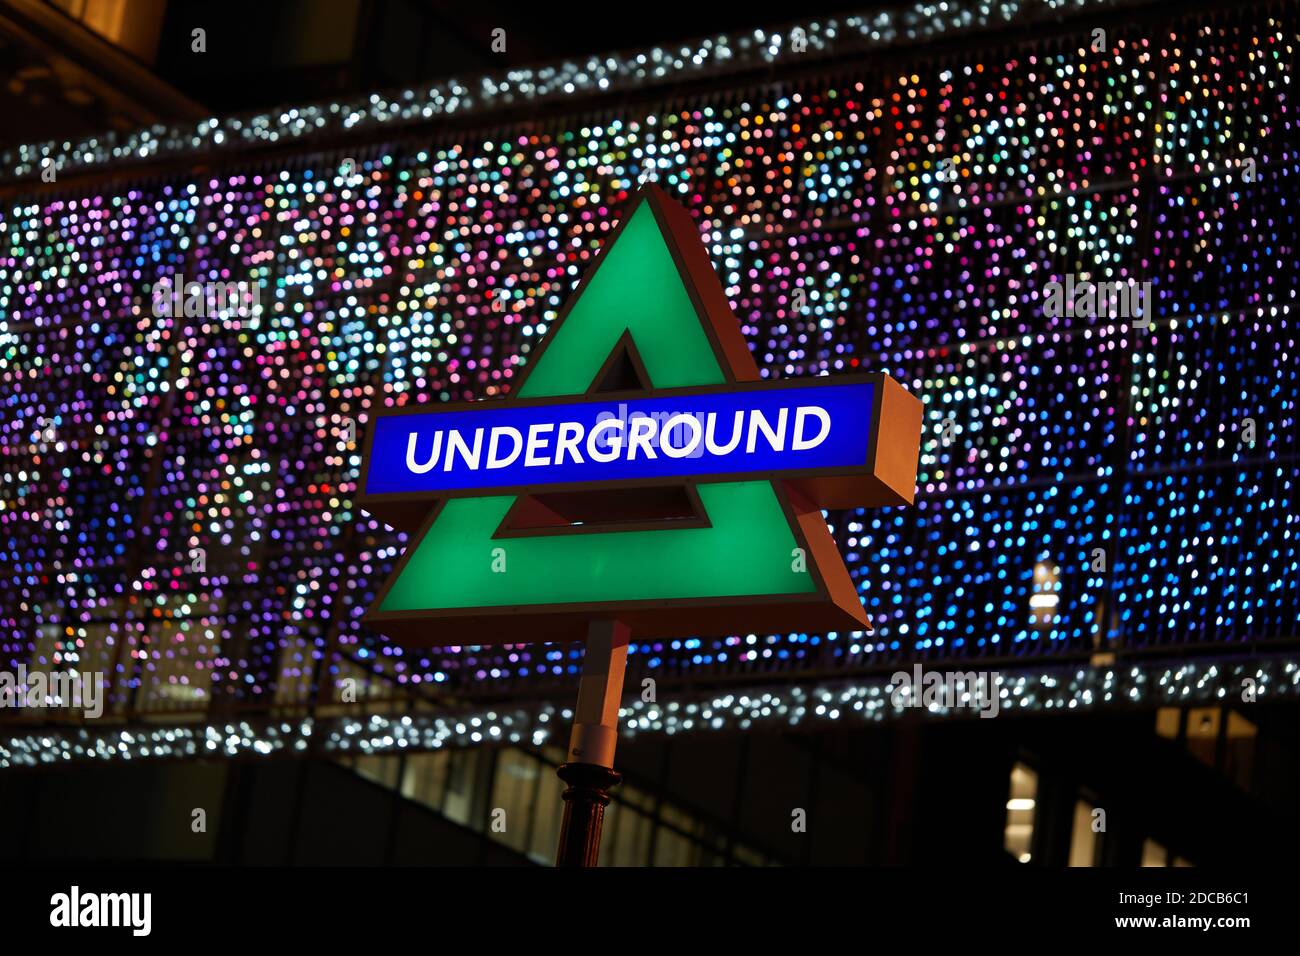 London, UK. - 19 Nov 2020: One of four illuminated PlayStation button symbols installed at Oxford Circus tube stations in a deal between Sony and Transport for London to promote the new launch of the PS5 in the U.K. Stock Photo